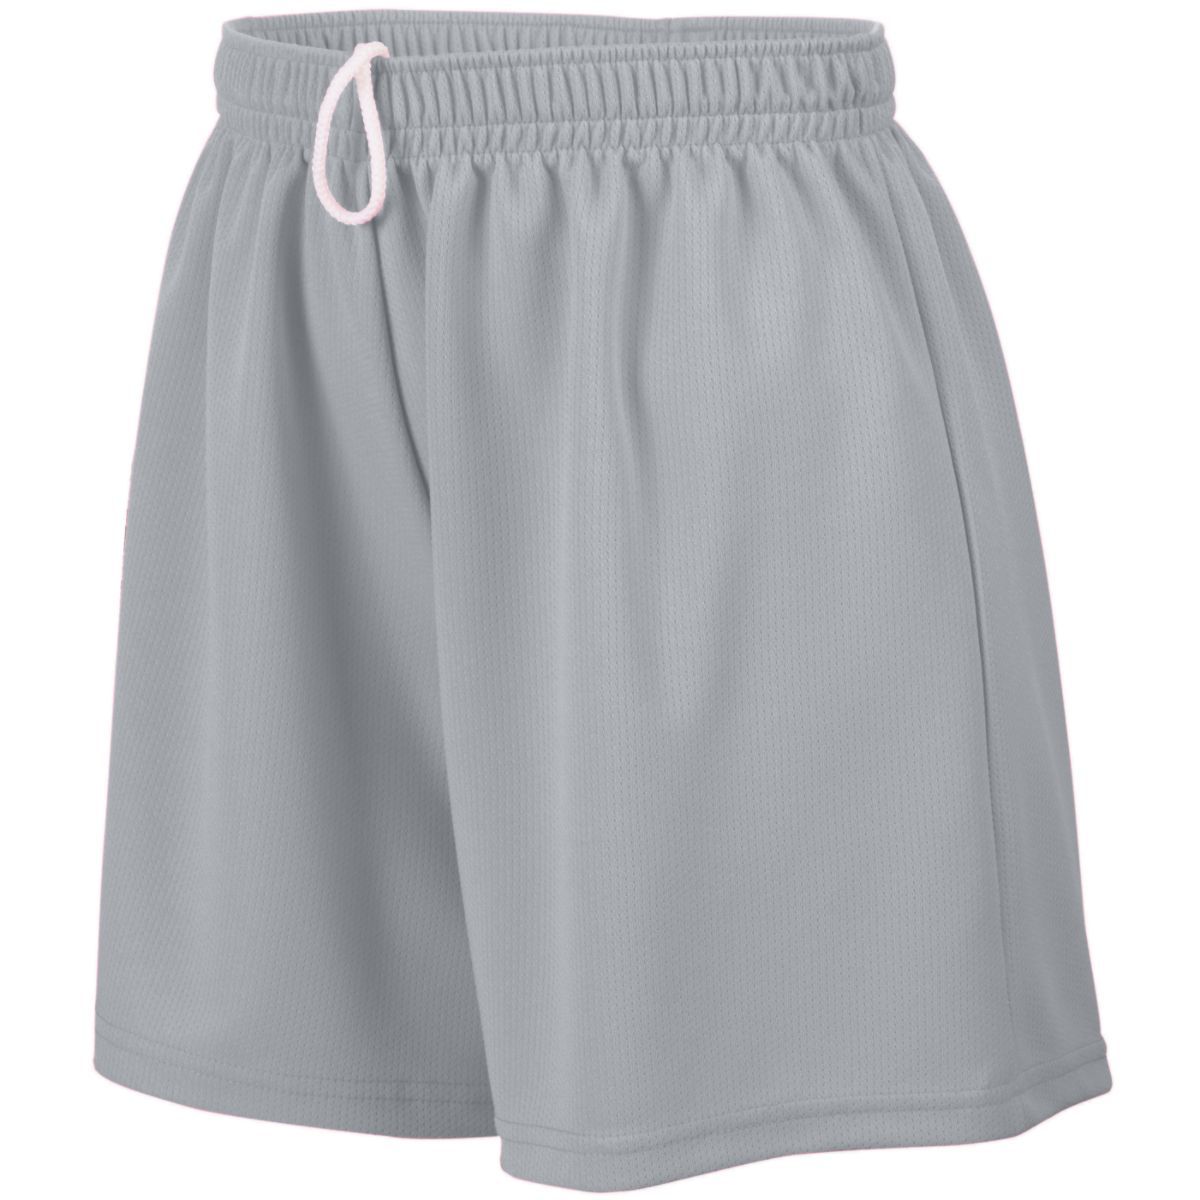 Augusta Sportswear Ladies Wicking Mesh Shorts in Silver Grey  -Part of the Ladies, Ladies-Shorts, Augusta-Products, Lacrosse, All-Sports, All-Sports-1 product lines at KanaleyCreations.com